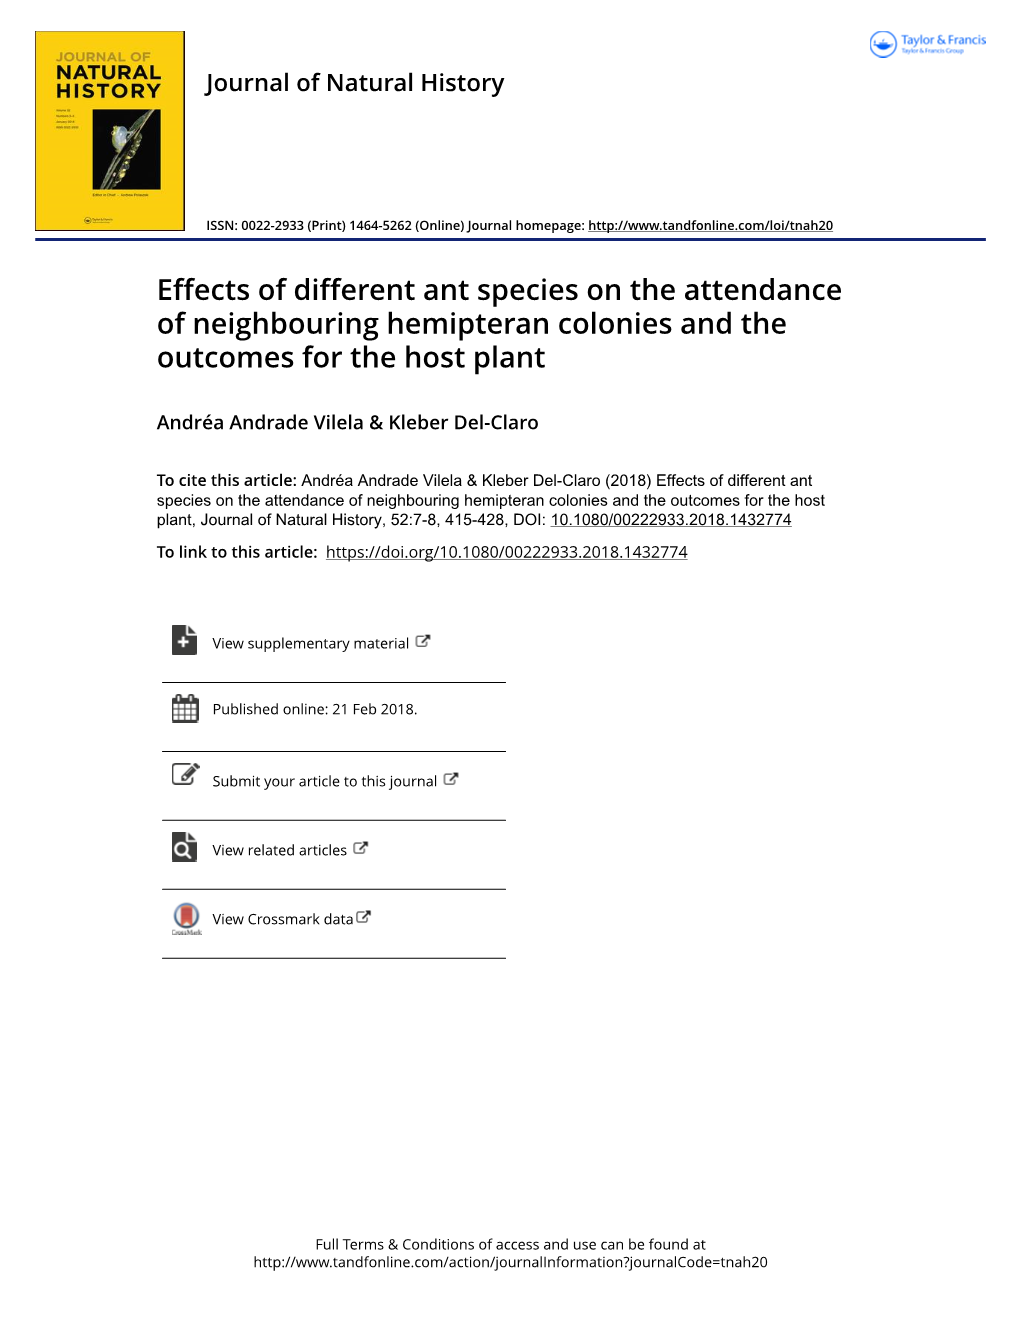 Effects of Different Ant Species on the Attendance of Neighbouring Hemipteran Colonies and the Outcomes for the Host Plant